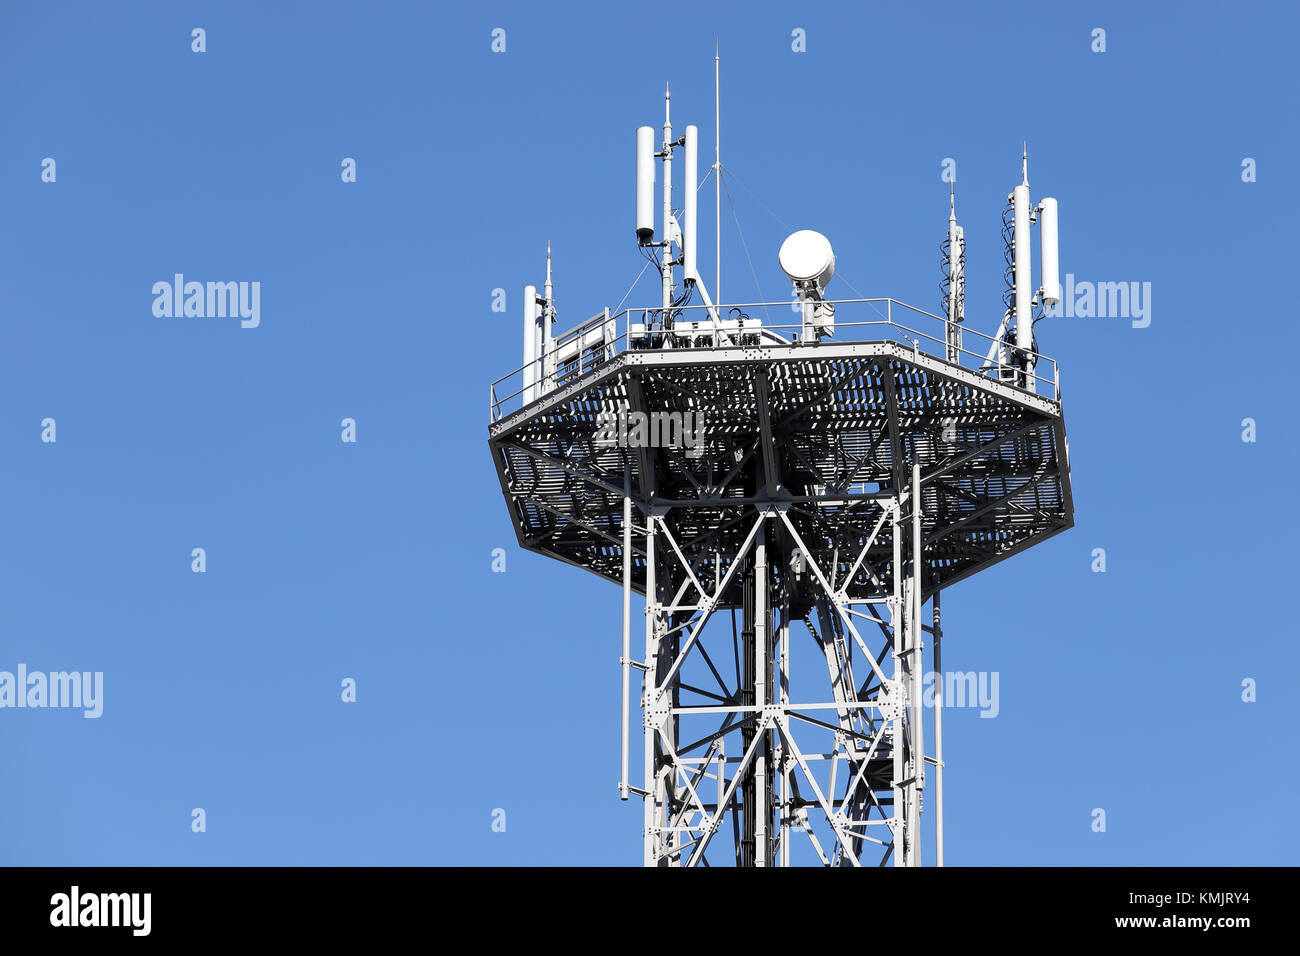 View of communications tower with antennas against blue sky Stock Photo